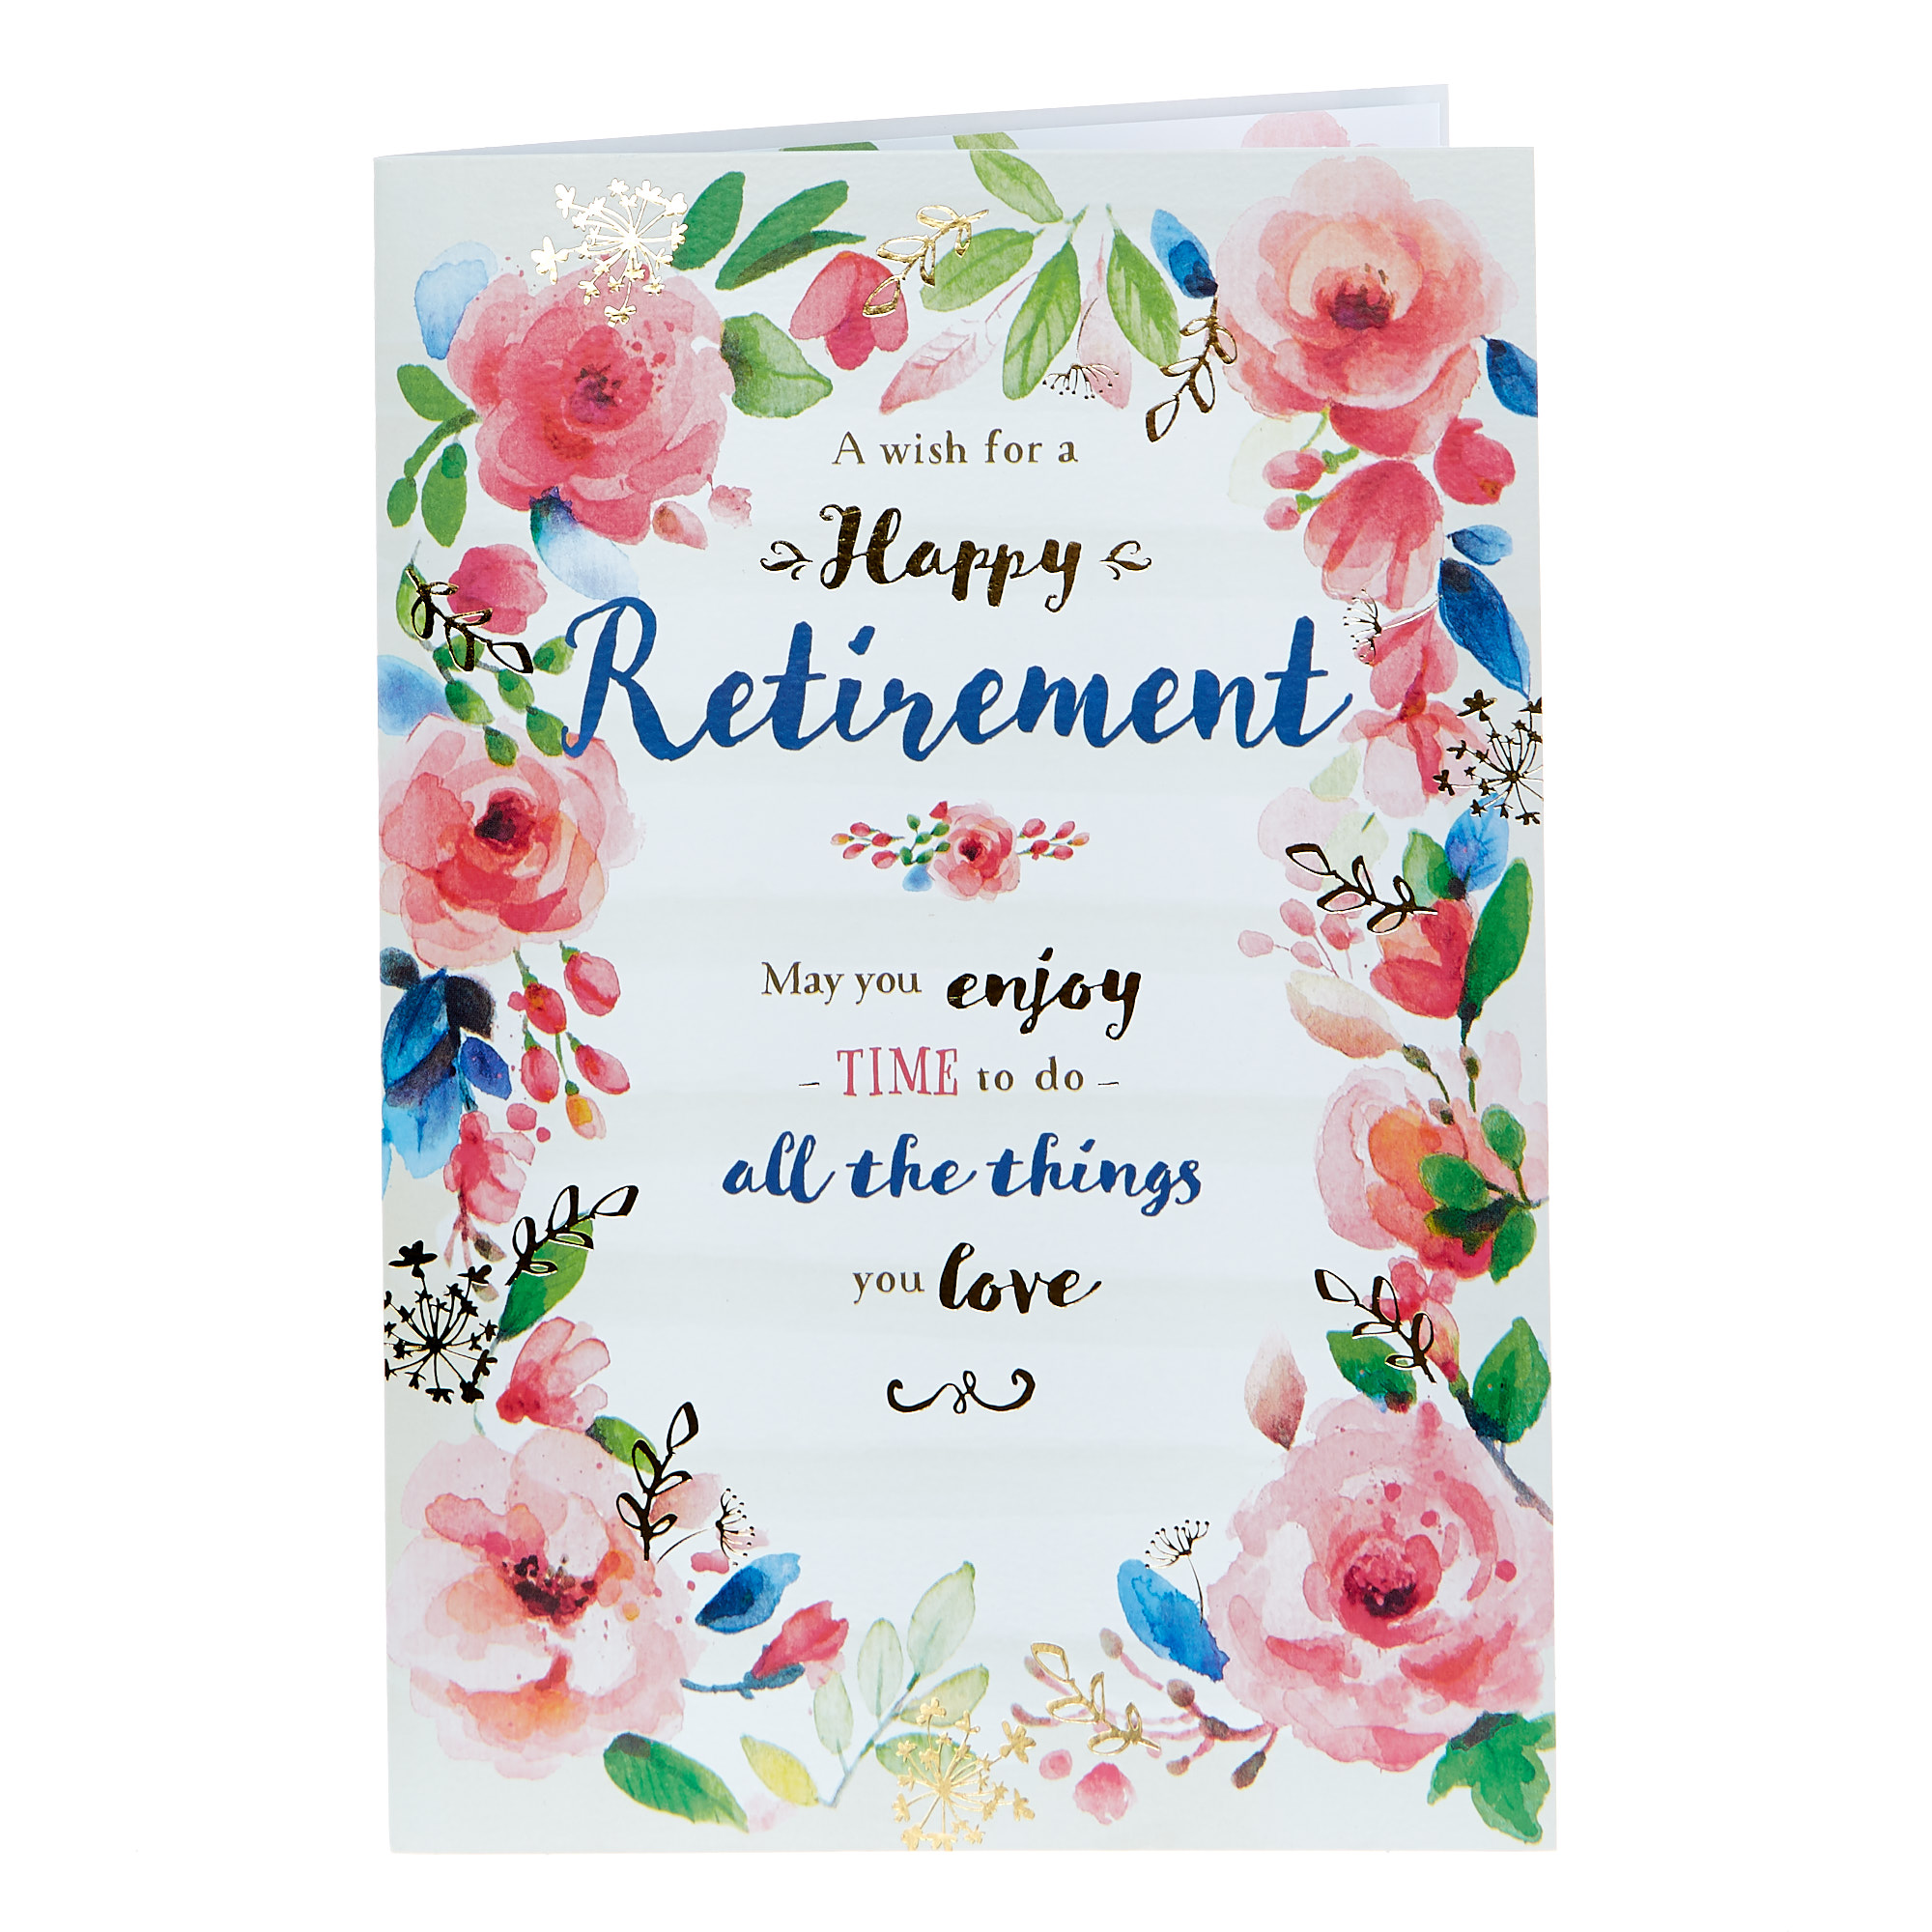 Retirement Card - The Things You Love